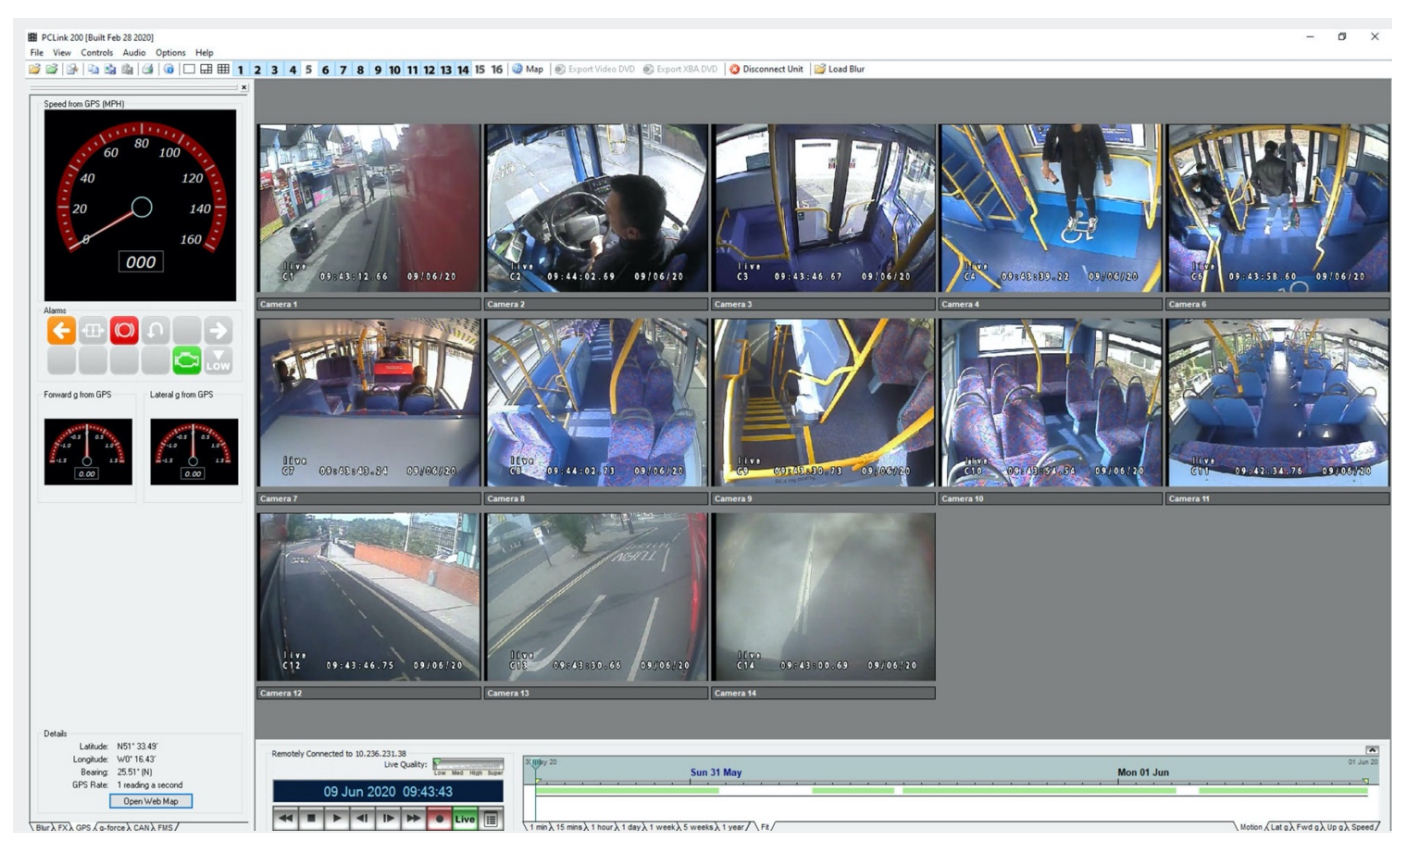 Coach and Bus CCTV 101 guide